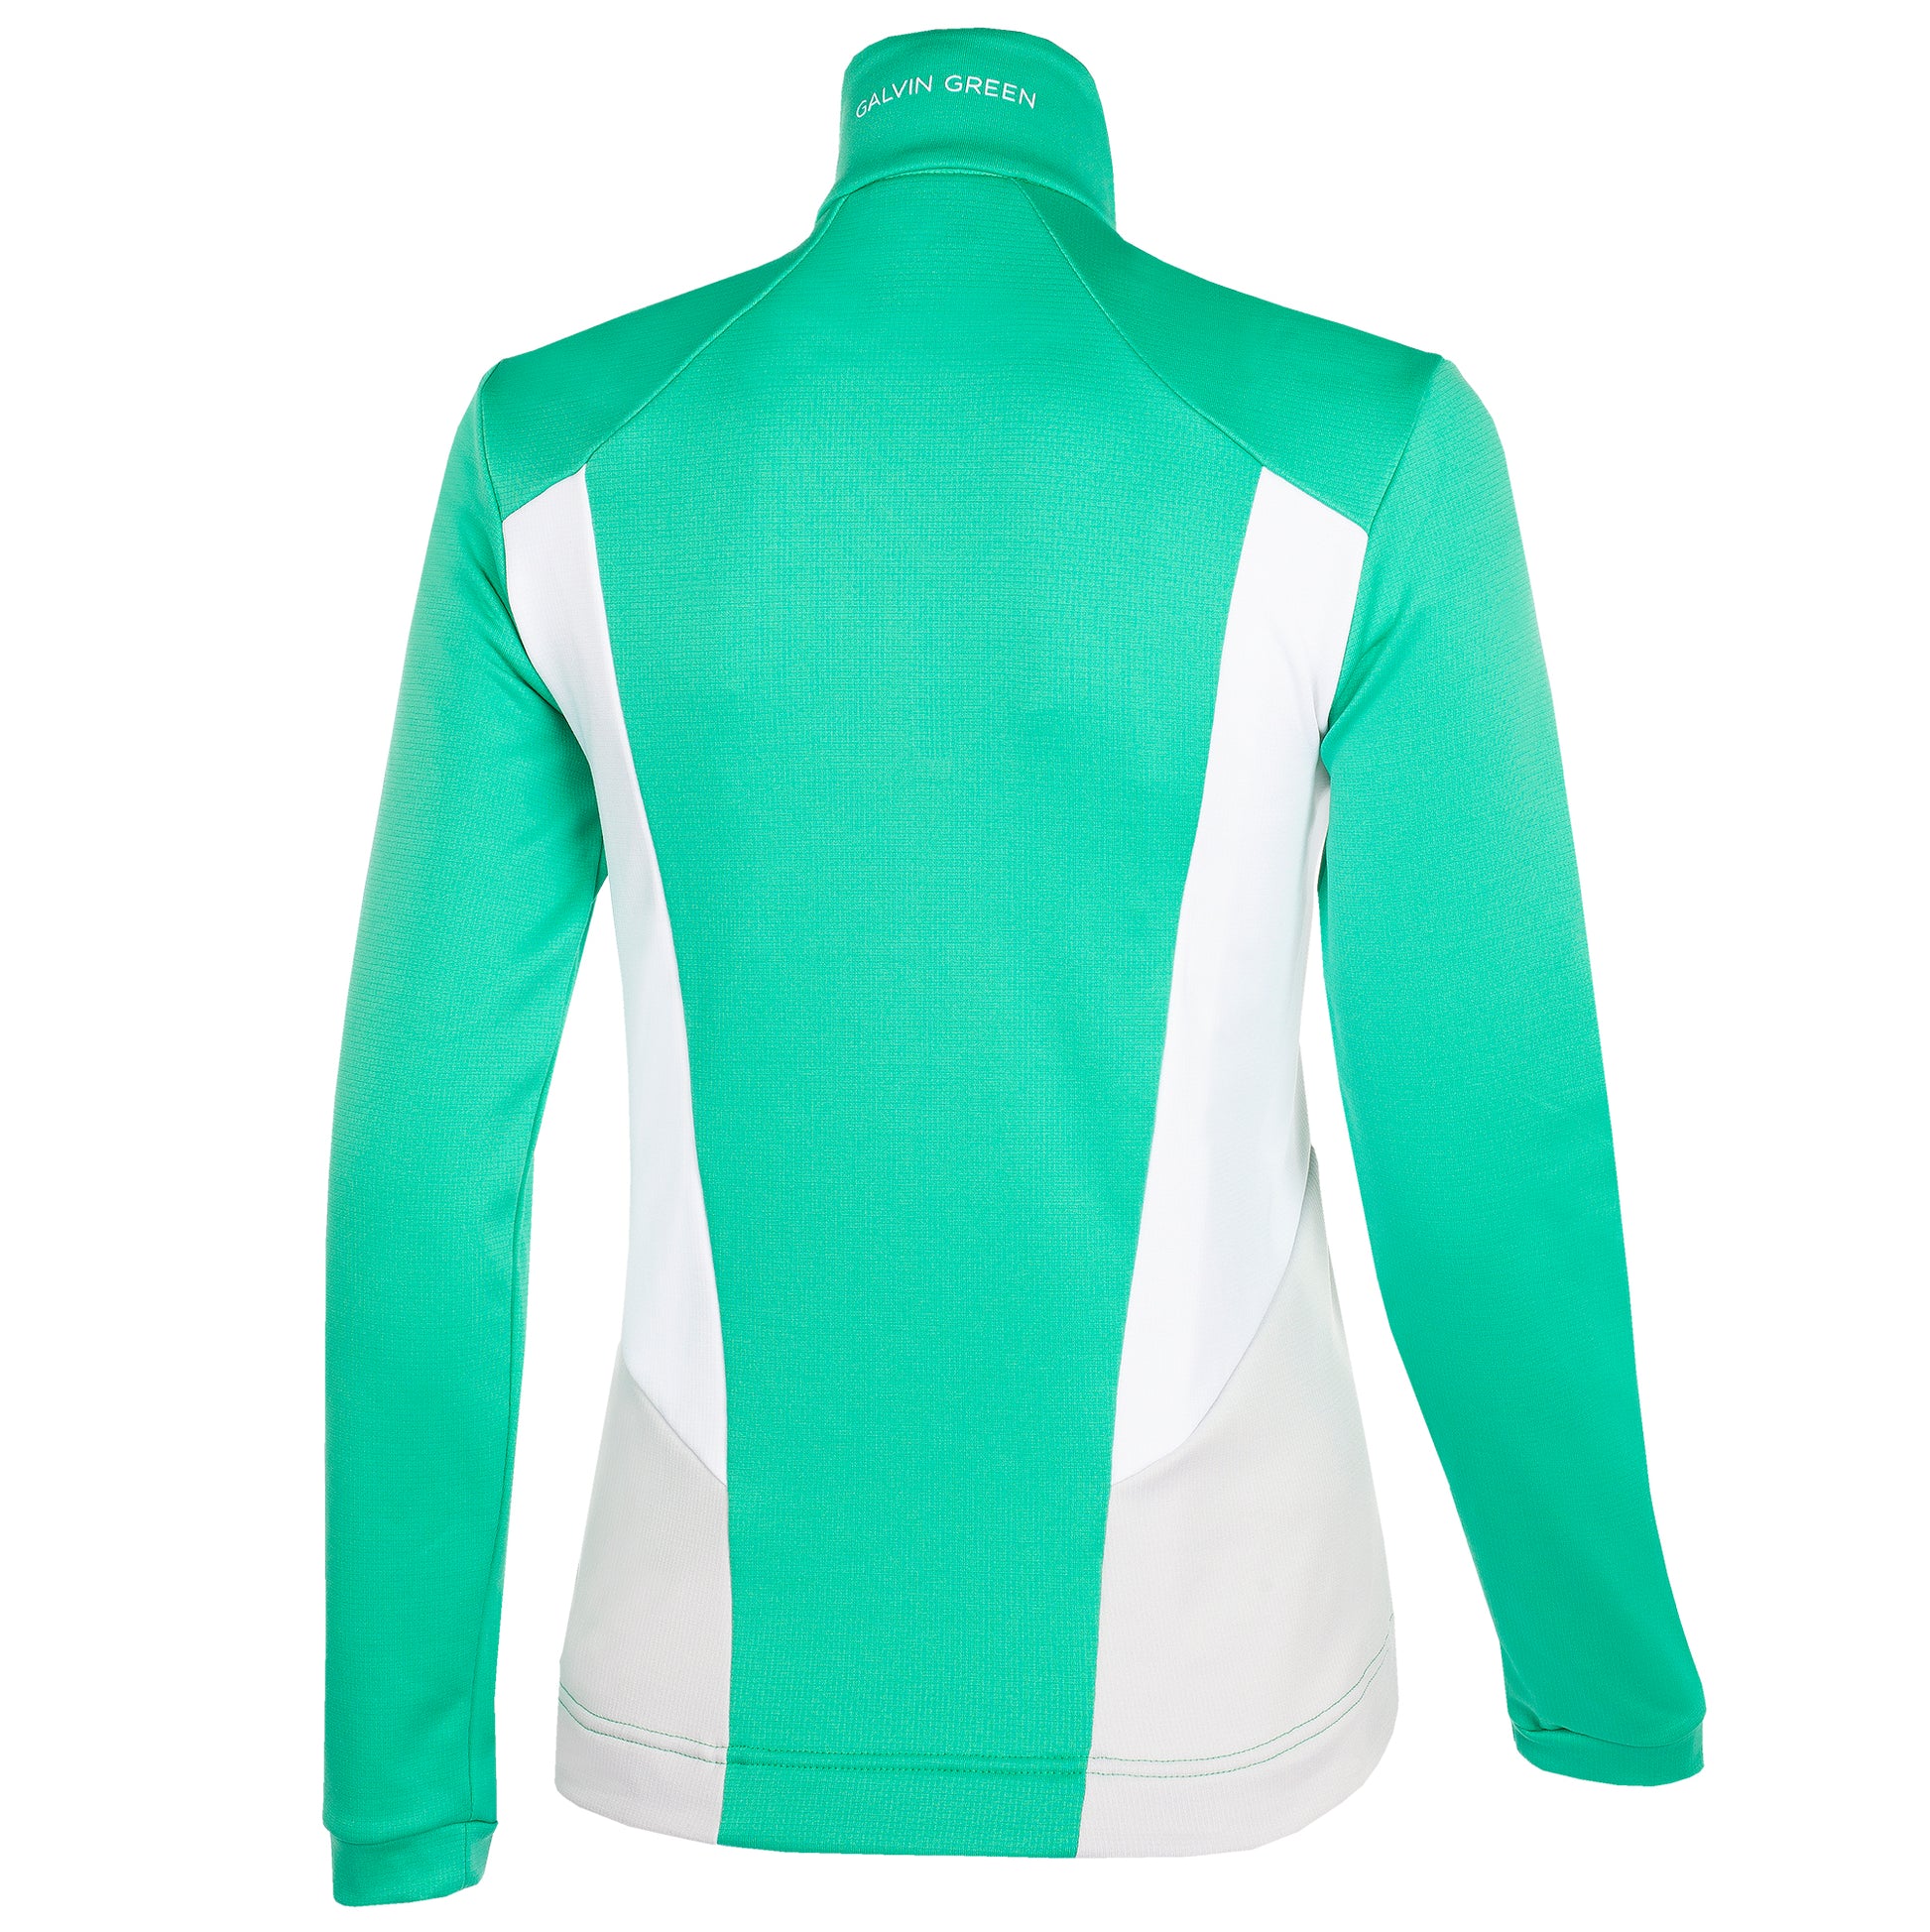 Galvin Green Ladies INSULA Jacket with Contrast Panels in Holly Green/White/Cool Grey